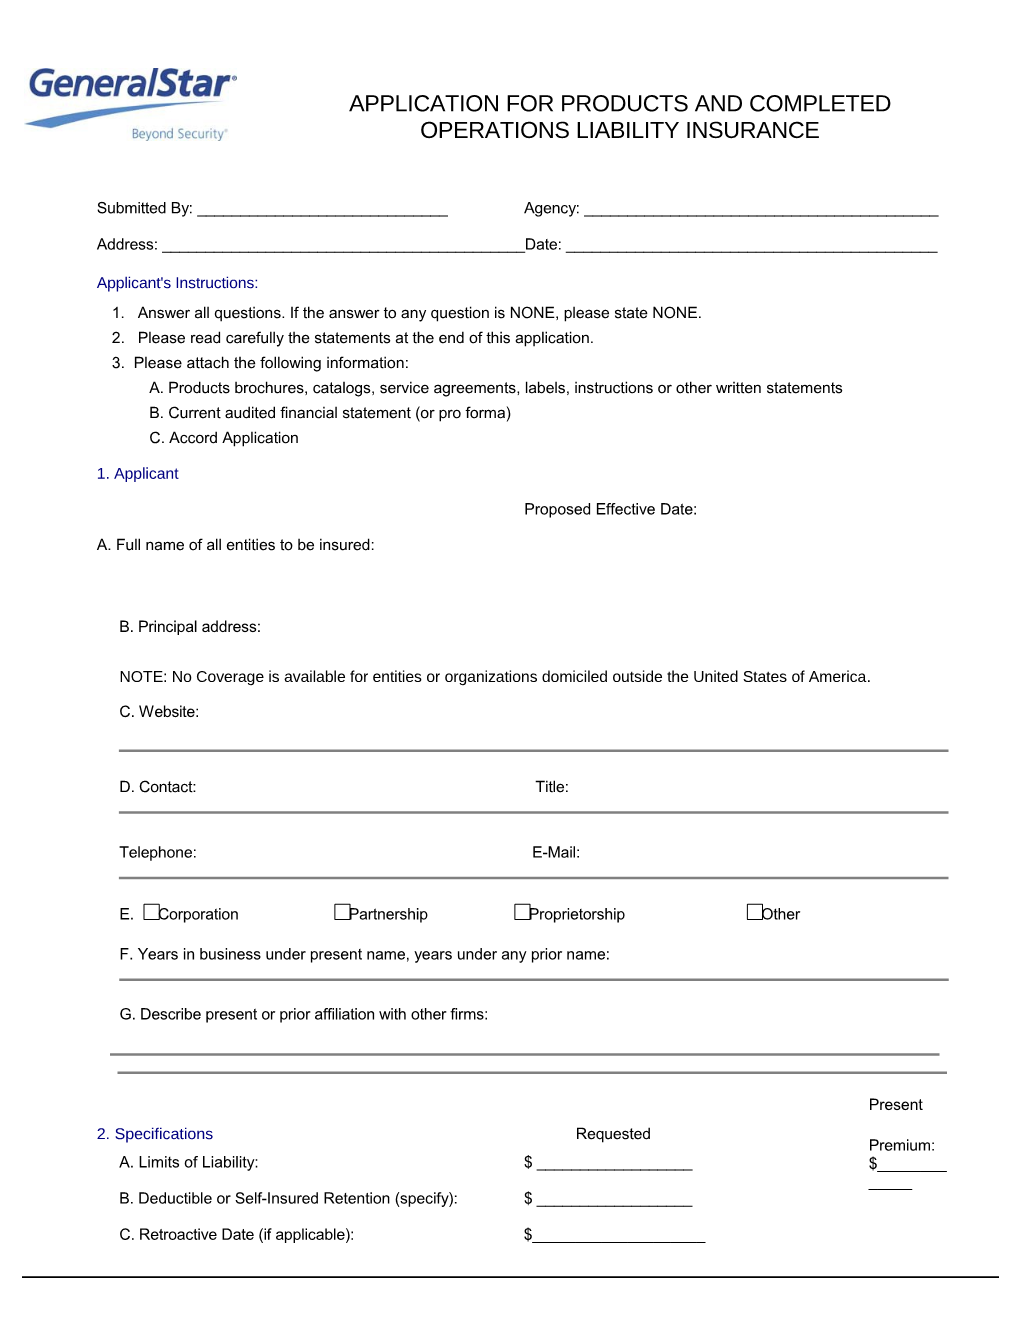 Application for Products and Completed Operations Liability Insurance